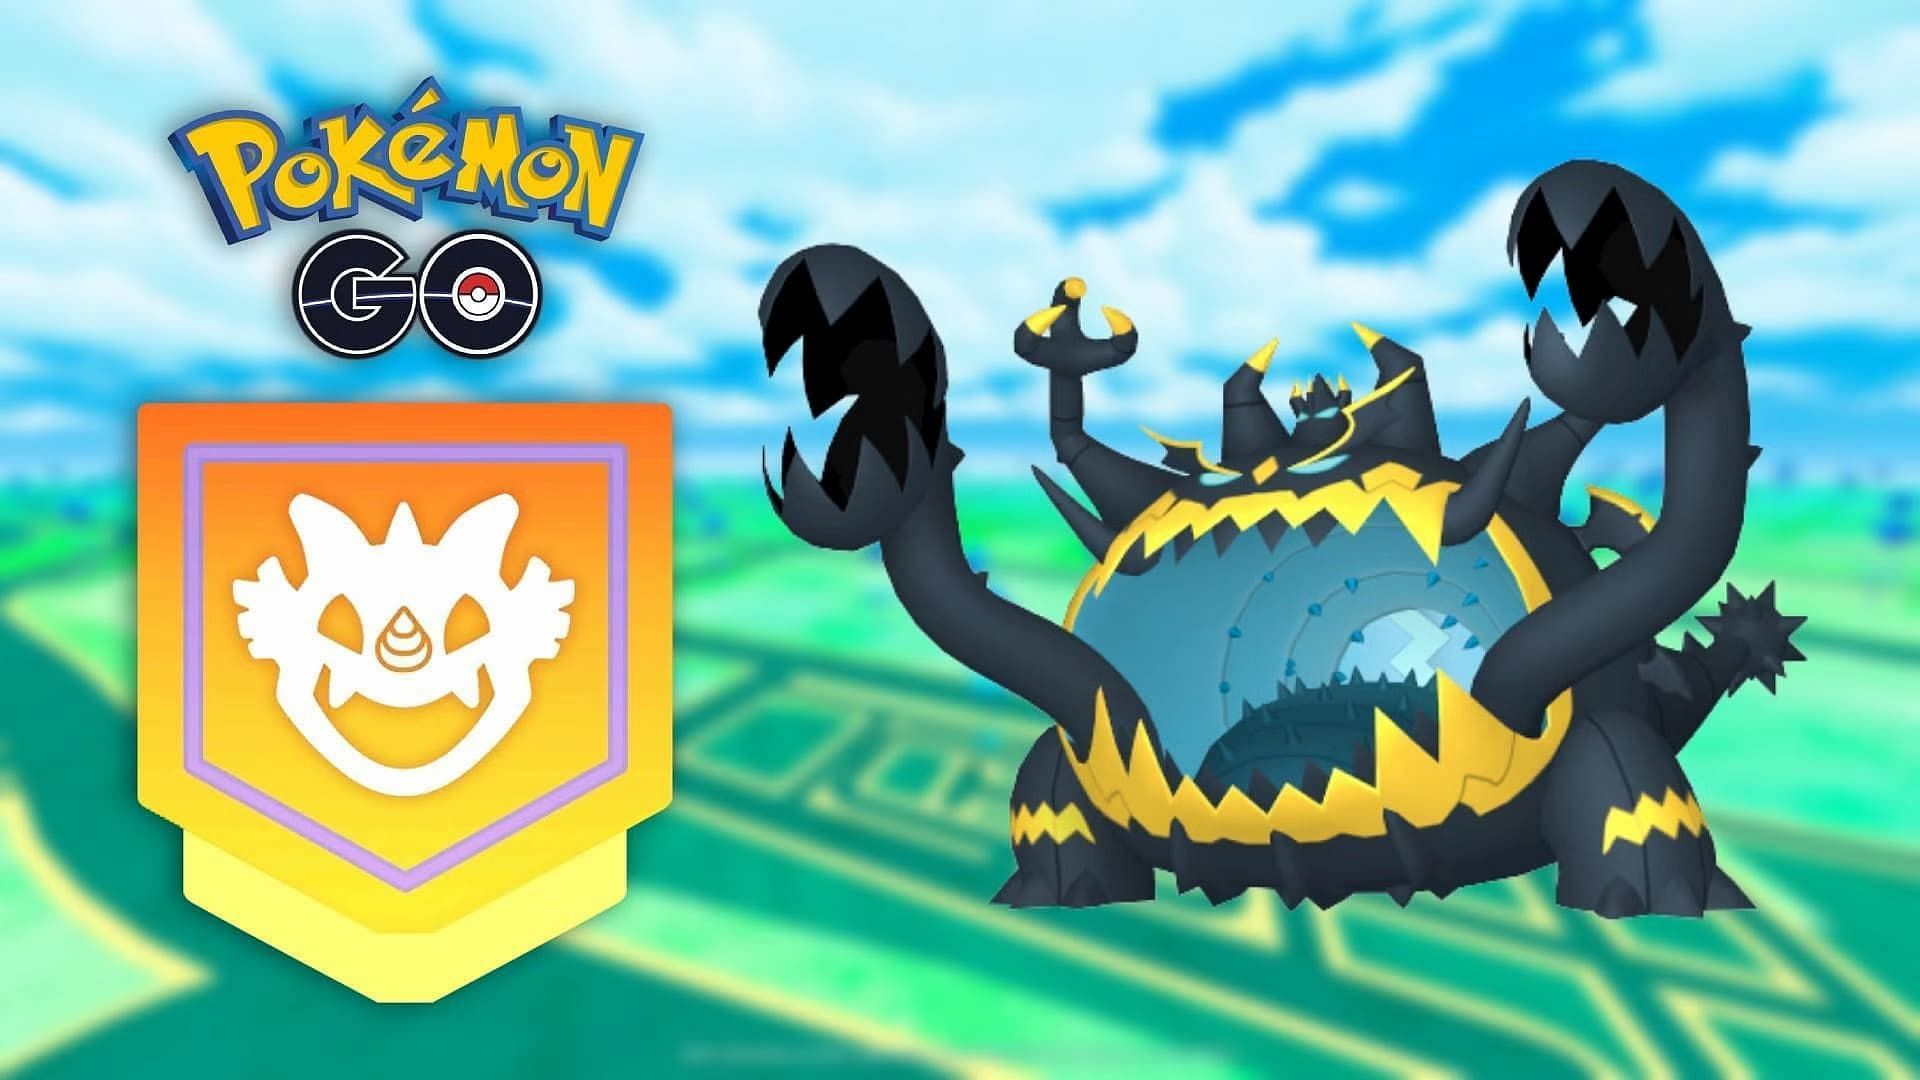 Pokemon GO Guzzlord raid guide: Weaknesses, best counters, and more